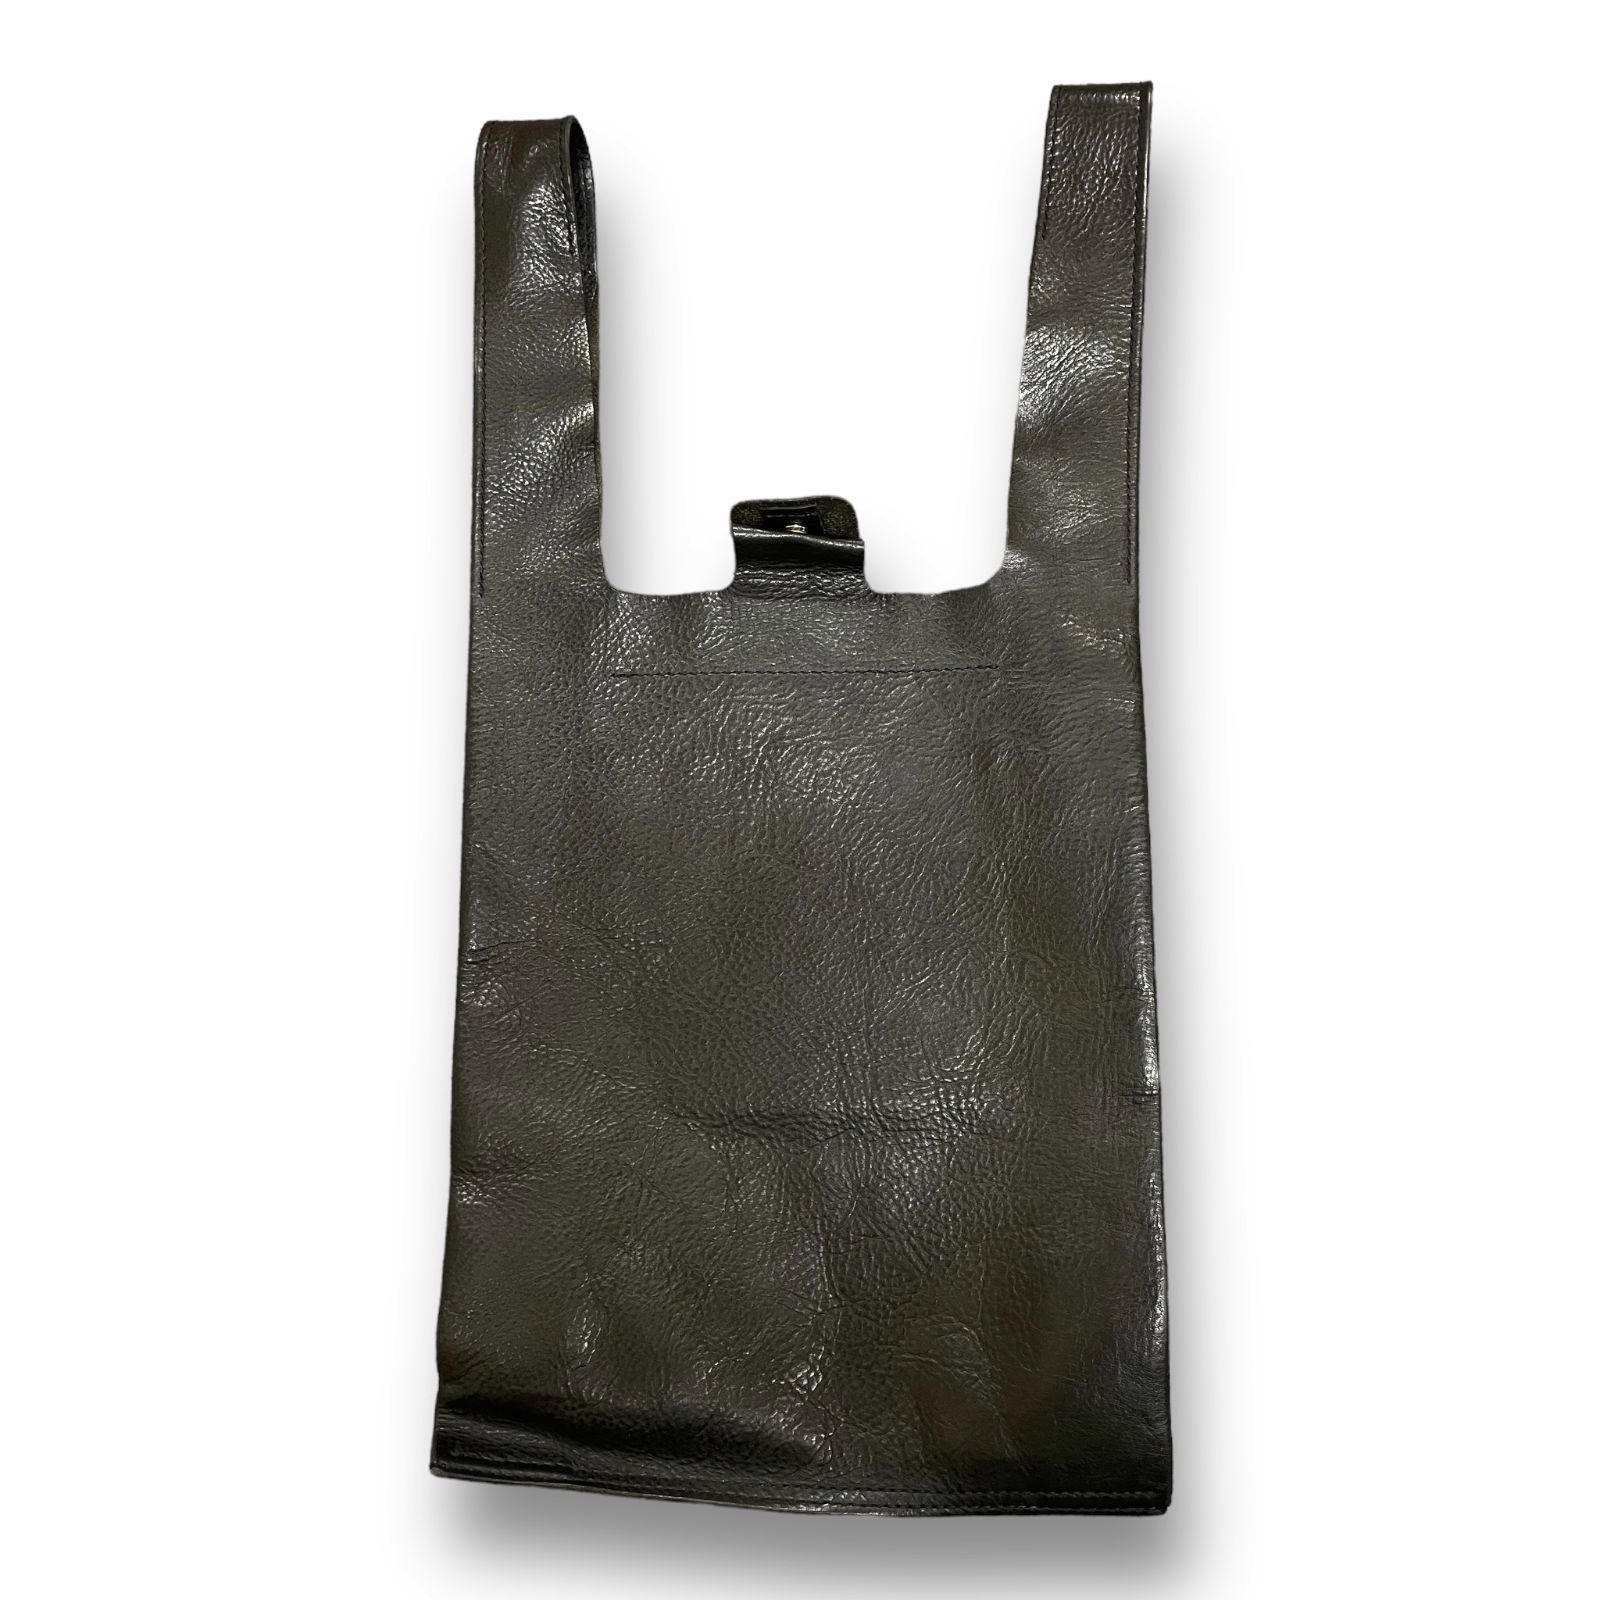 COOTIE PRODUCTIONS 23SS Leather C-Store Bag レザー ストア バッグ 